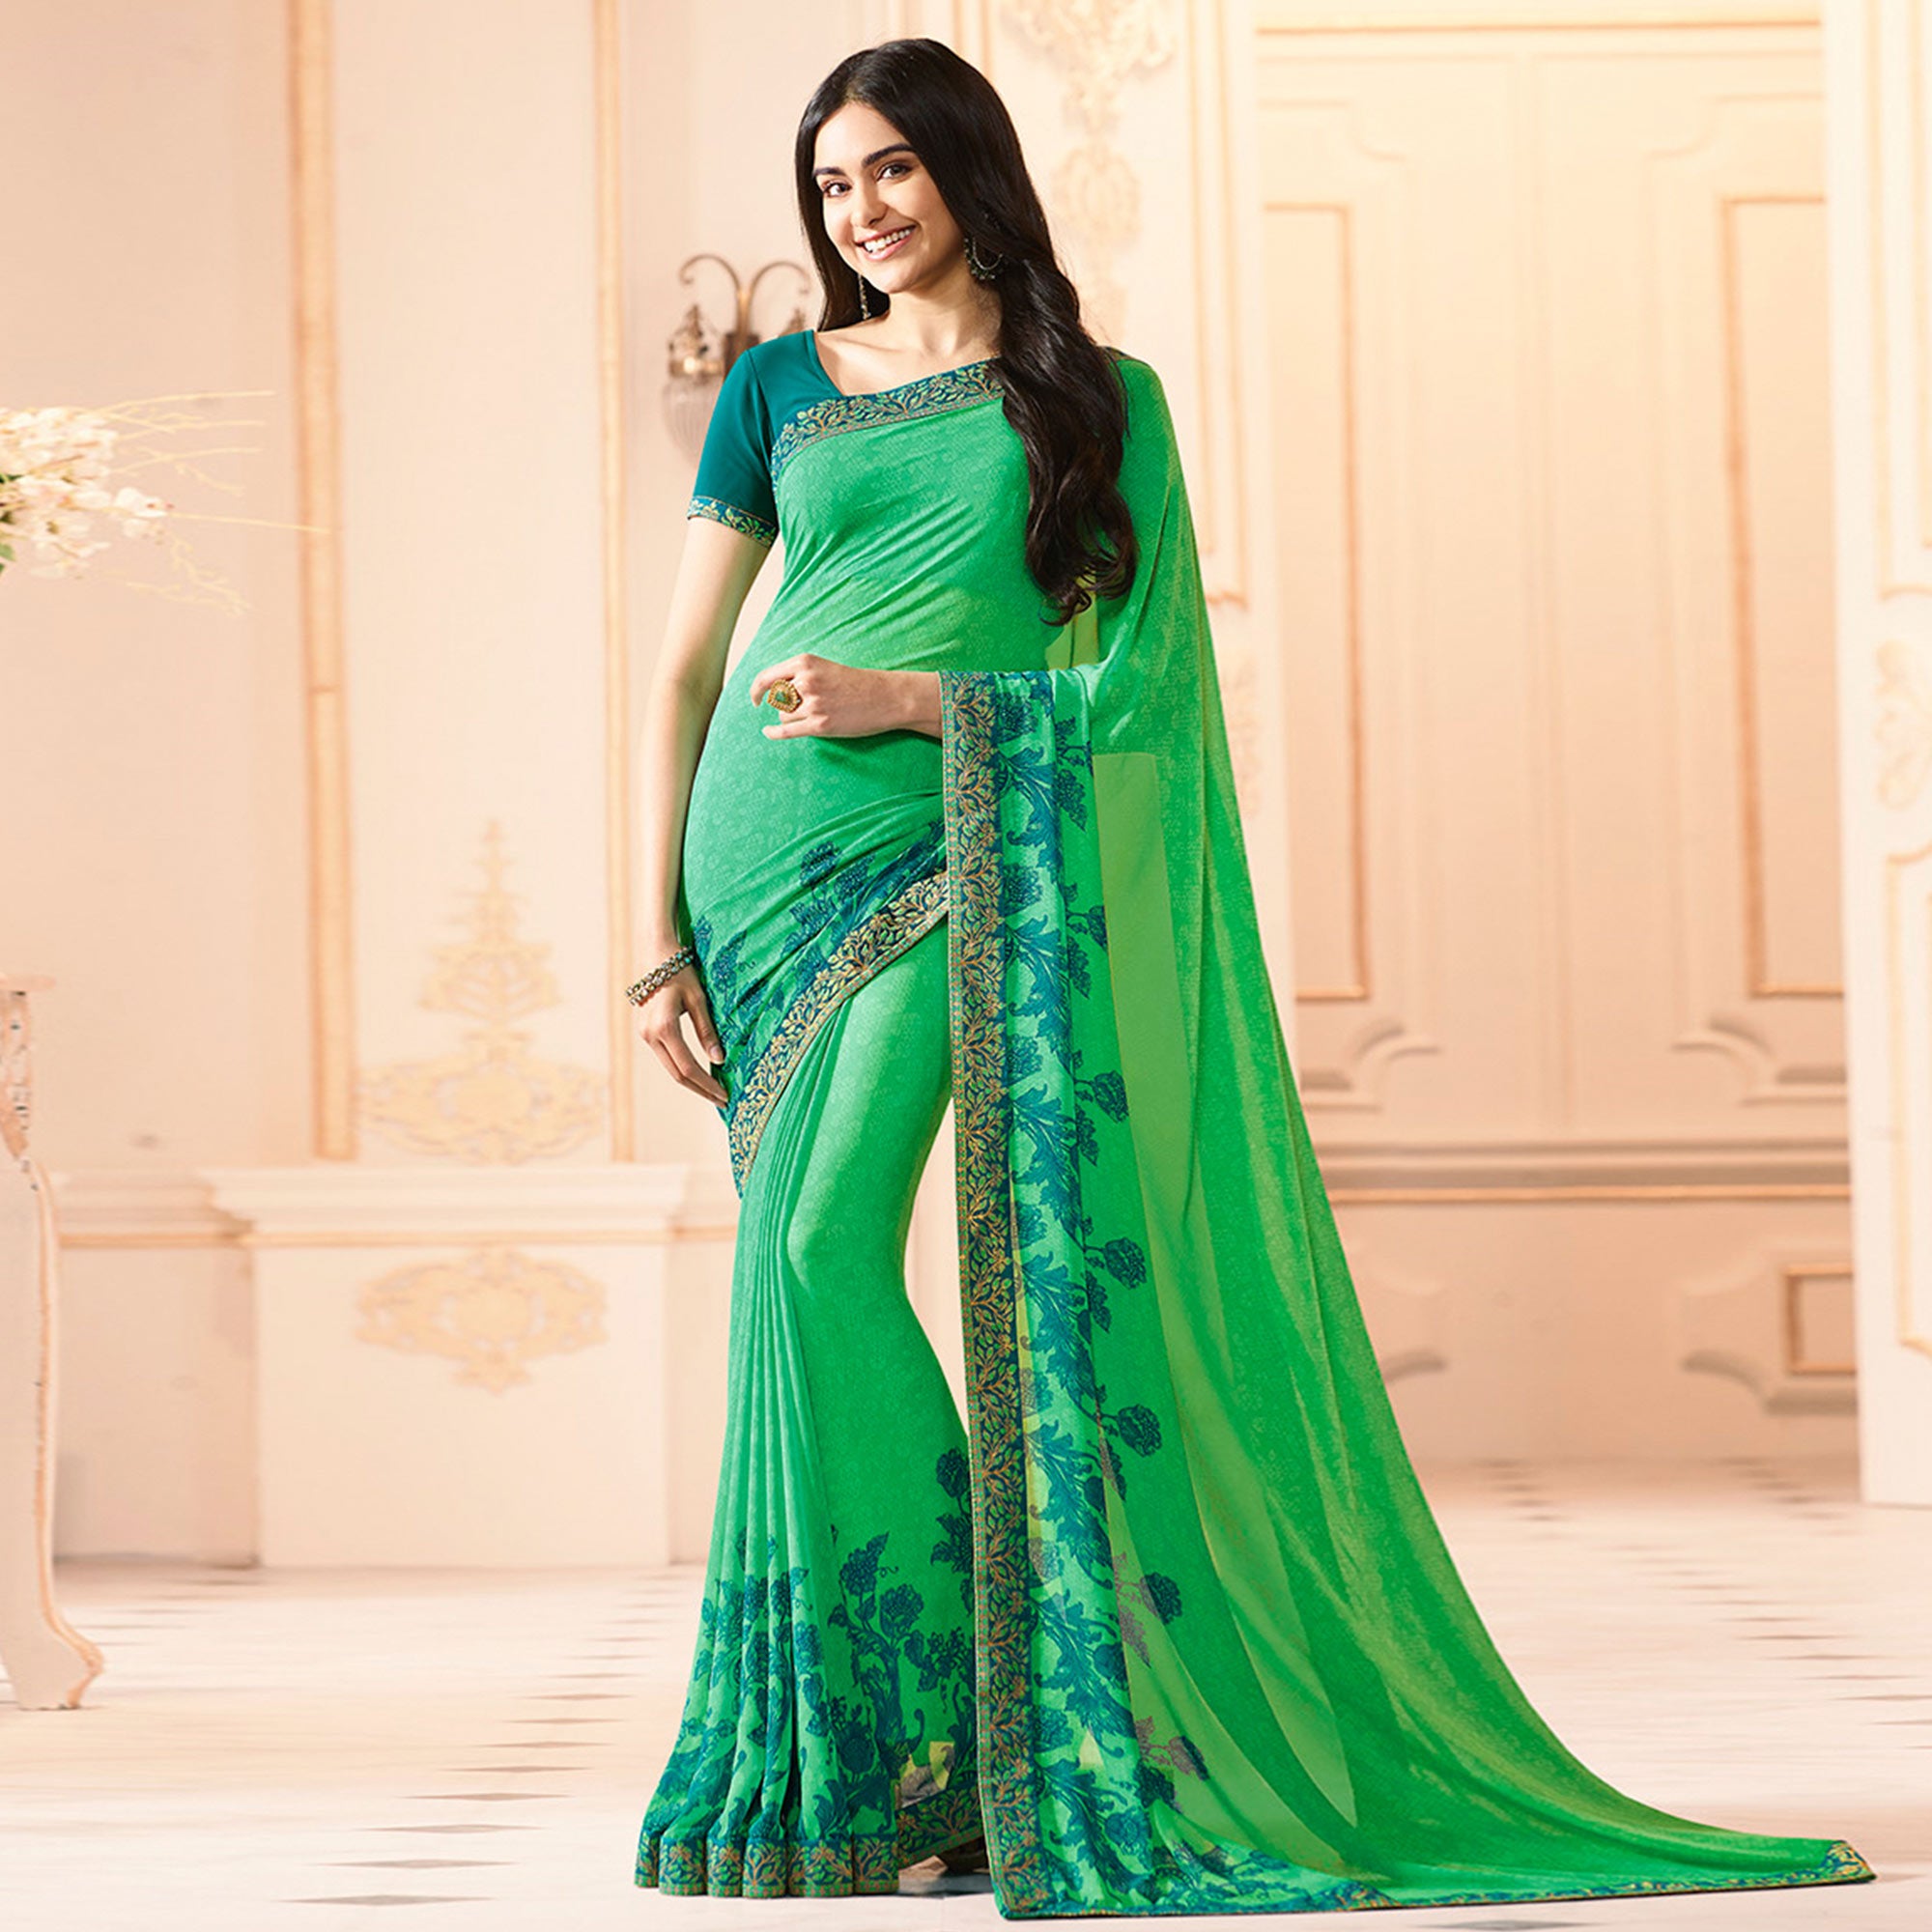 Green Floral Printed Georgette Saree With Lace Border